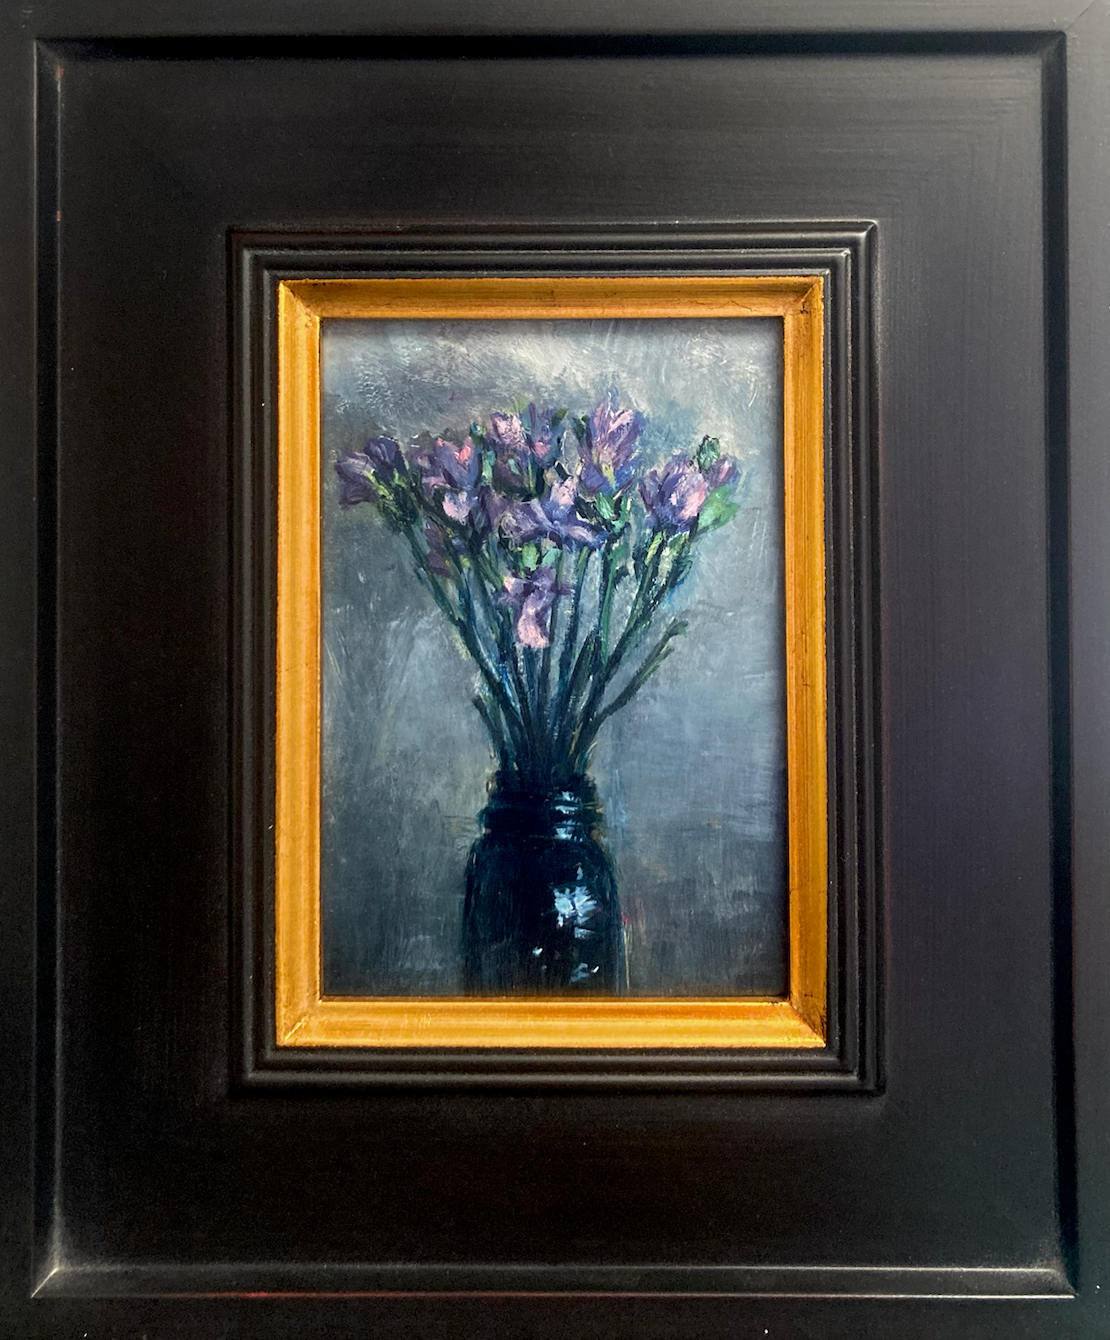 Oil painting of purple flowers in a black vase against a gray background titled 'Purple' by E. E. Jacks with dark wood frame with gold trim